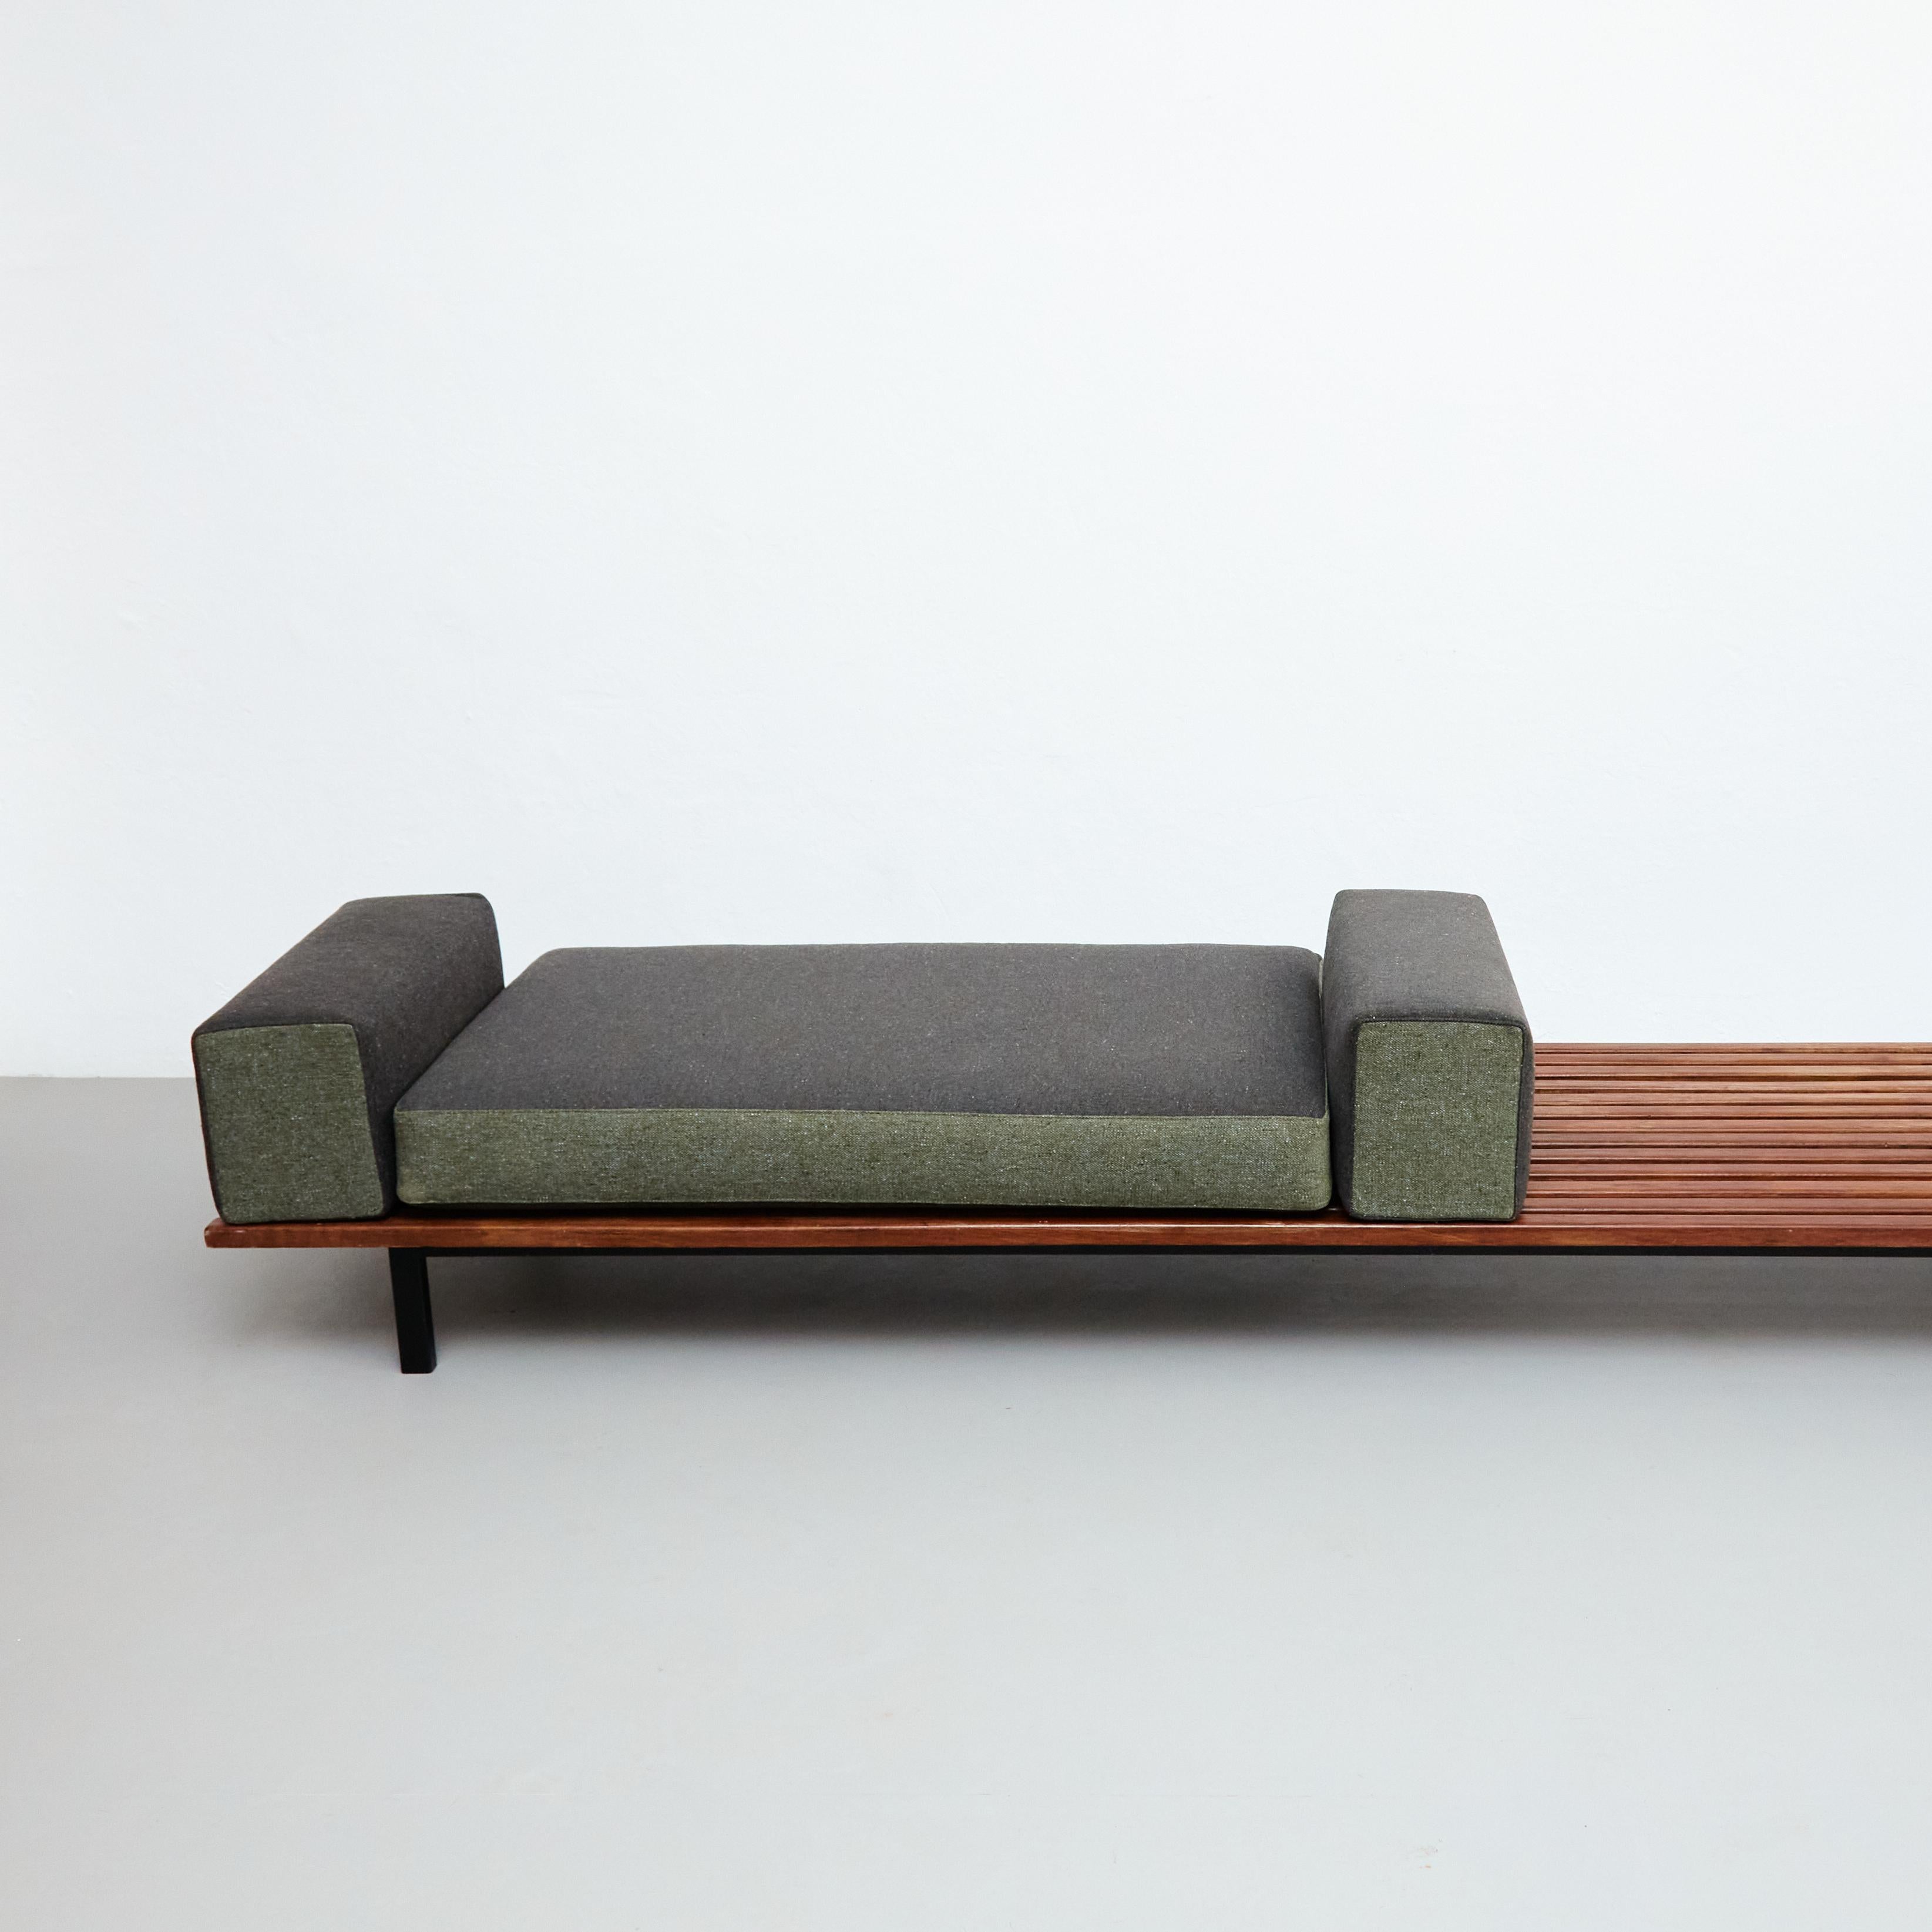 French Charlotte Perriand Cansado Bench, circa 1950 For Sale